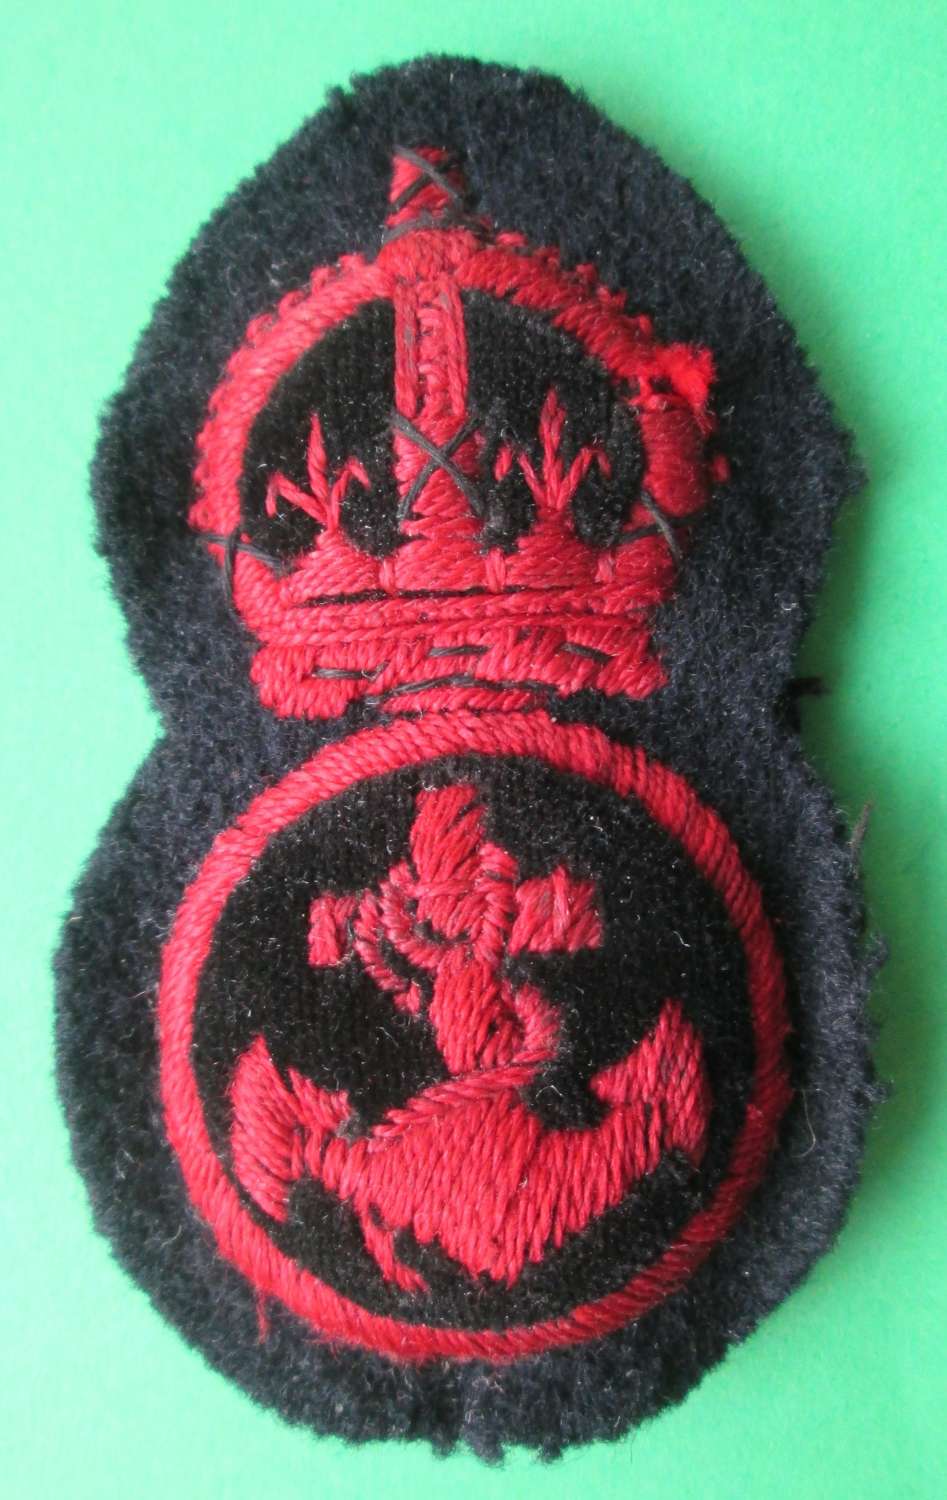 A Naval petty officer's cap badge